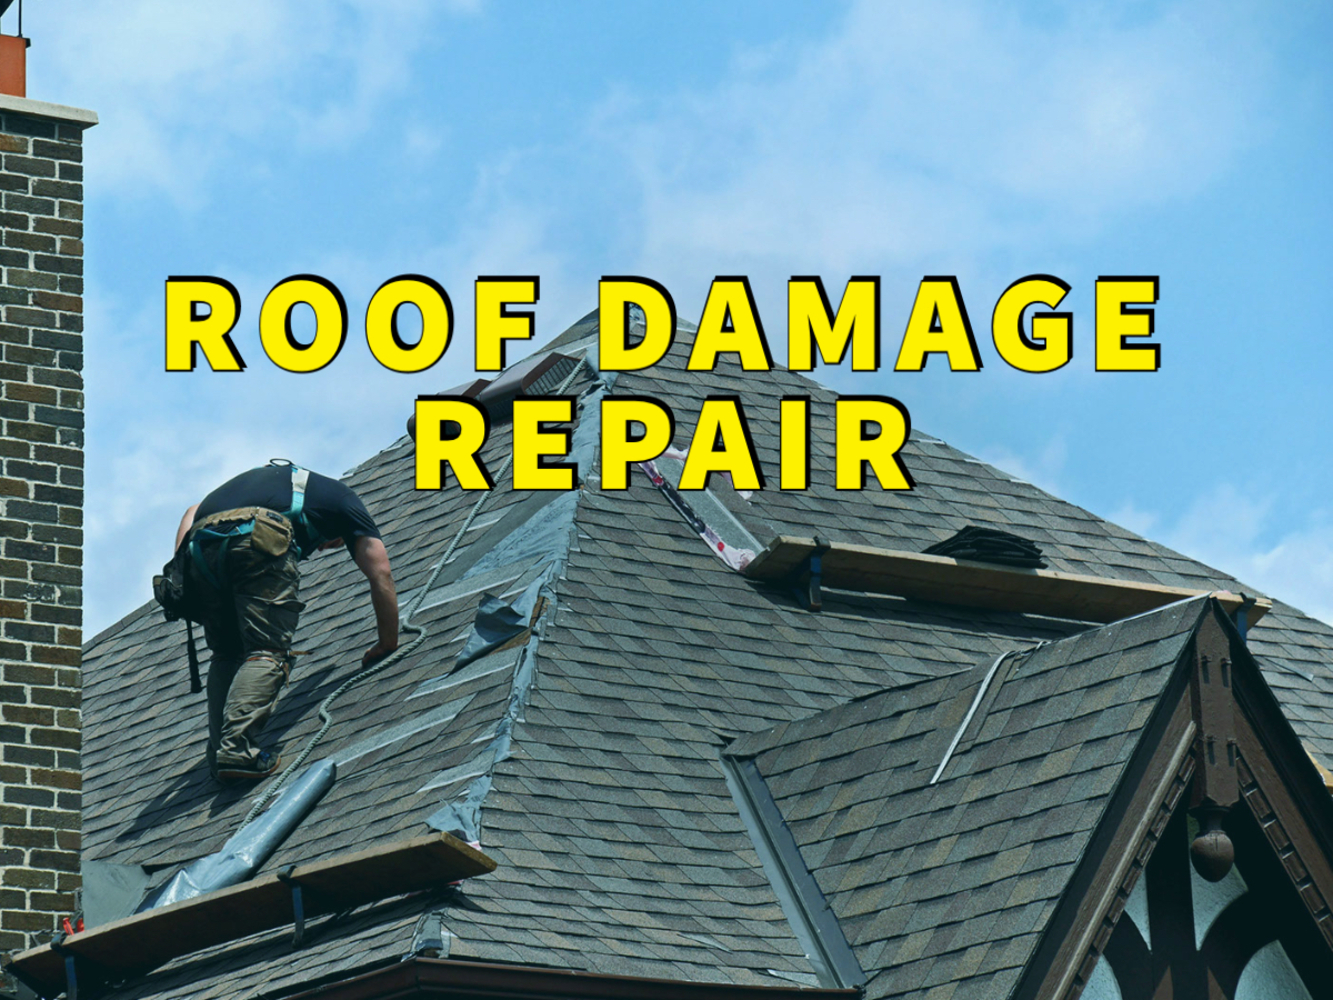 roof damage repair written in yellow over roofer on roof fixing shingles with blue sky in background